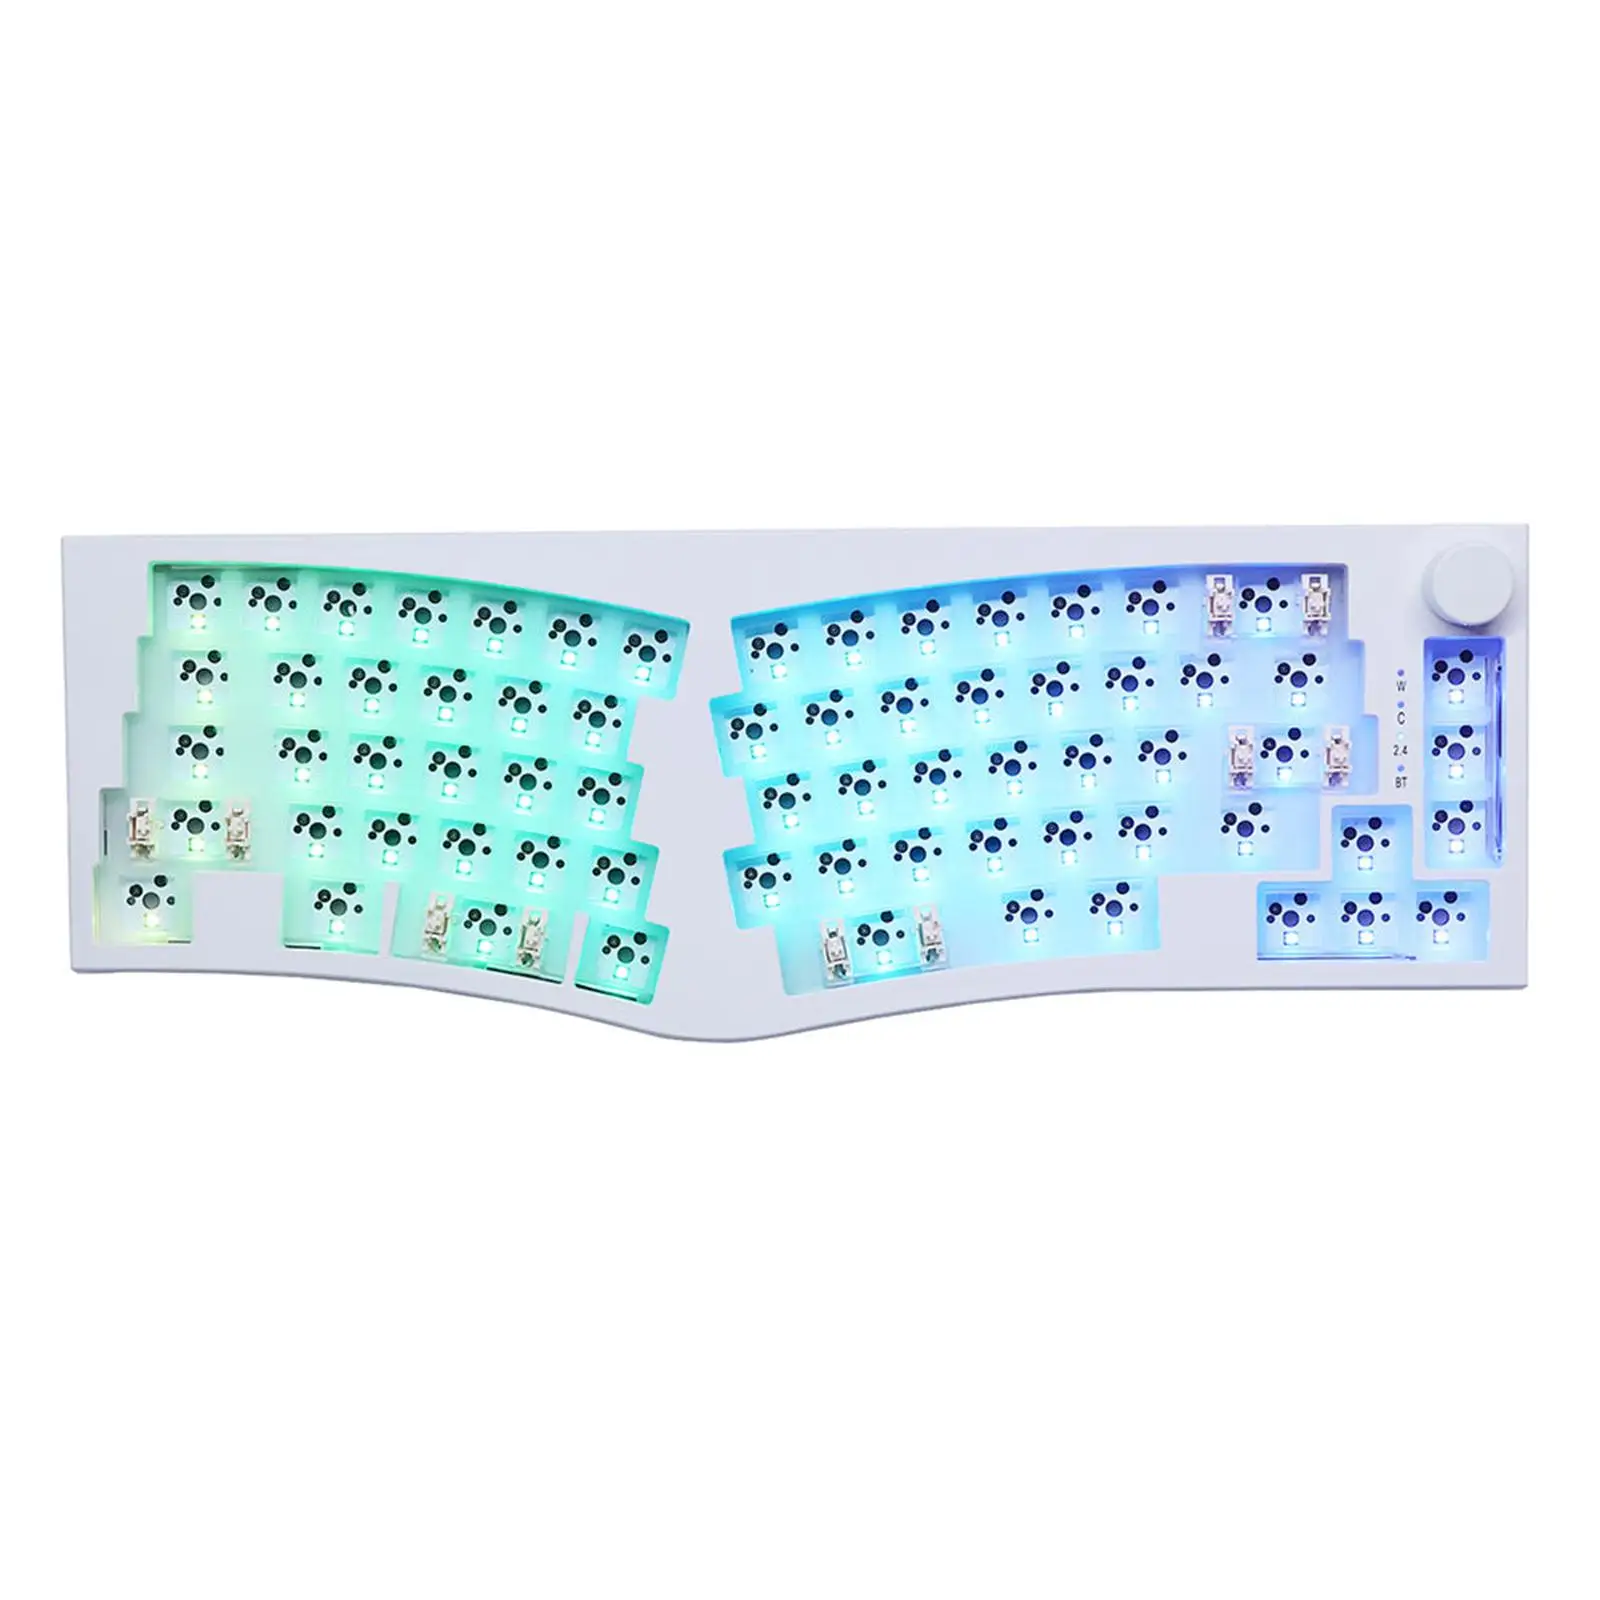 Professional Gaming Mechanical Keyboard Hot Swap Durable Waterproof Ergonomic Wired Wireless for computer Business Trip